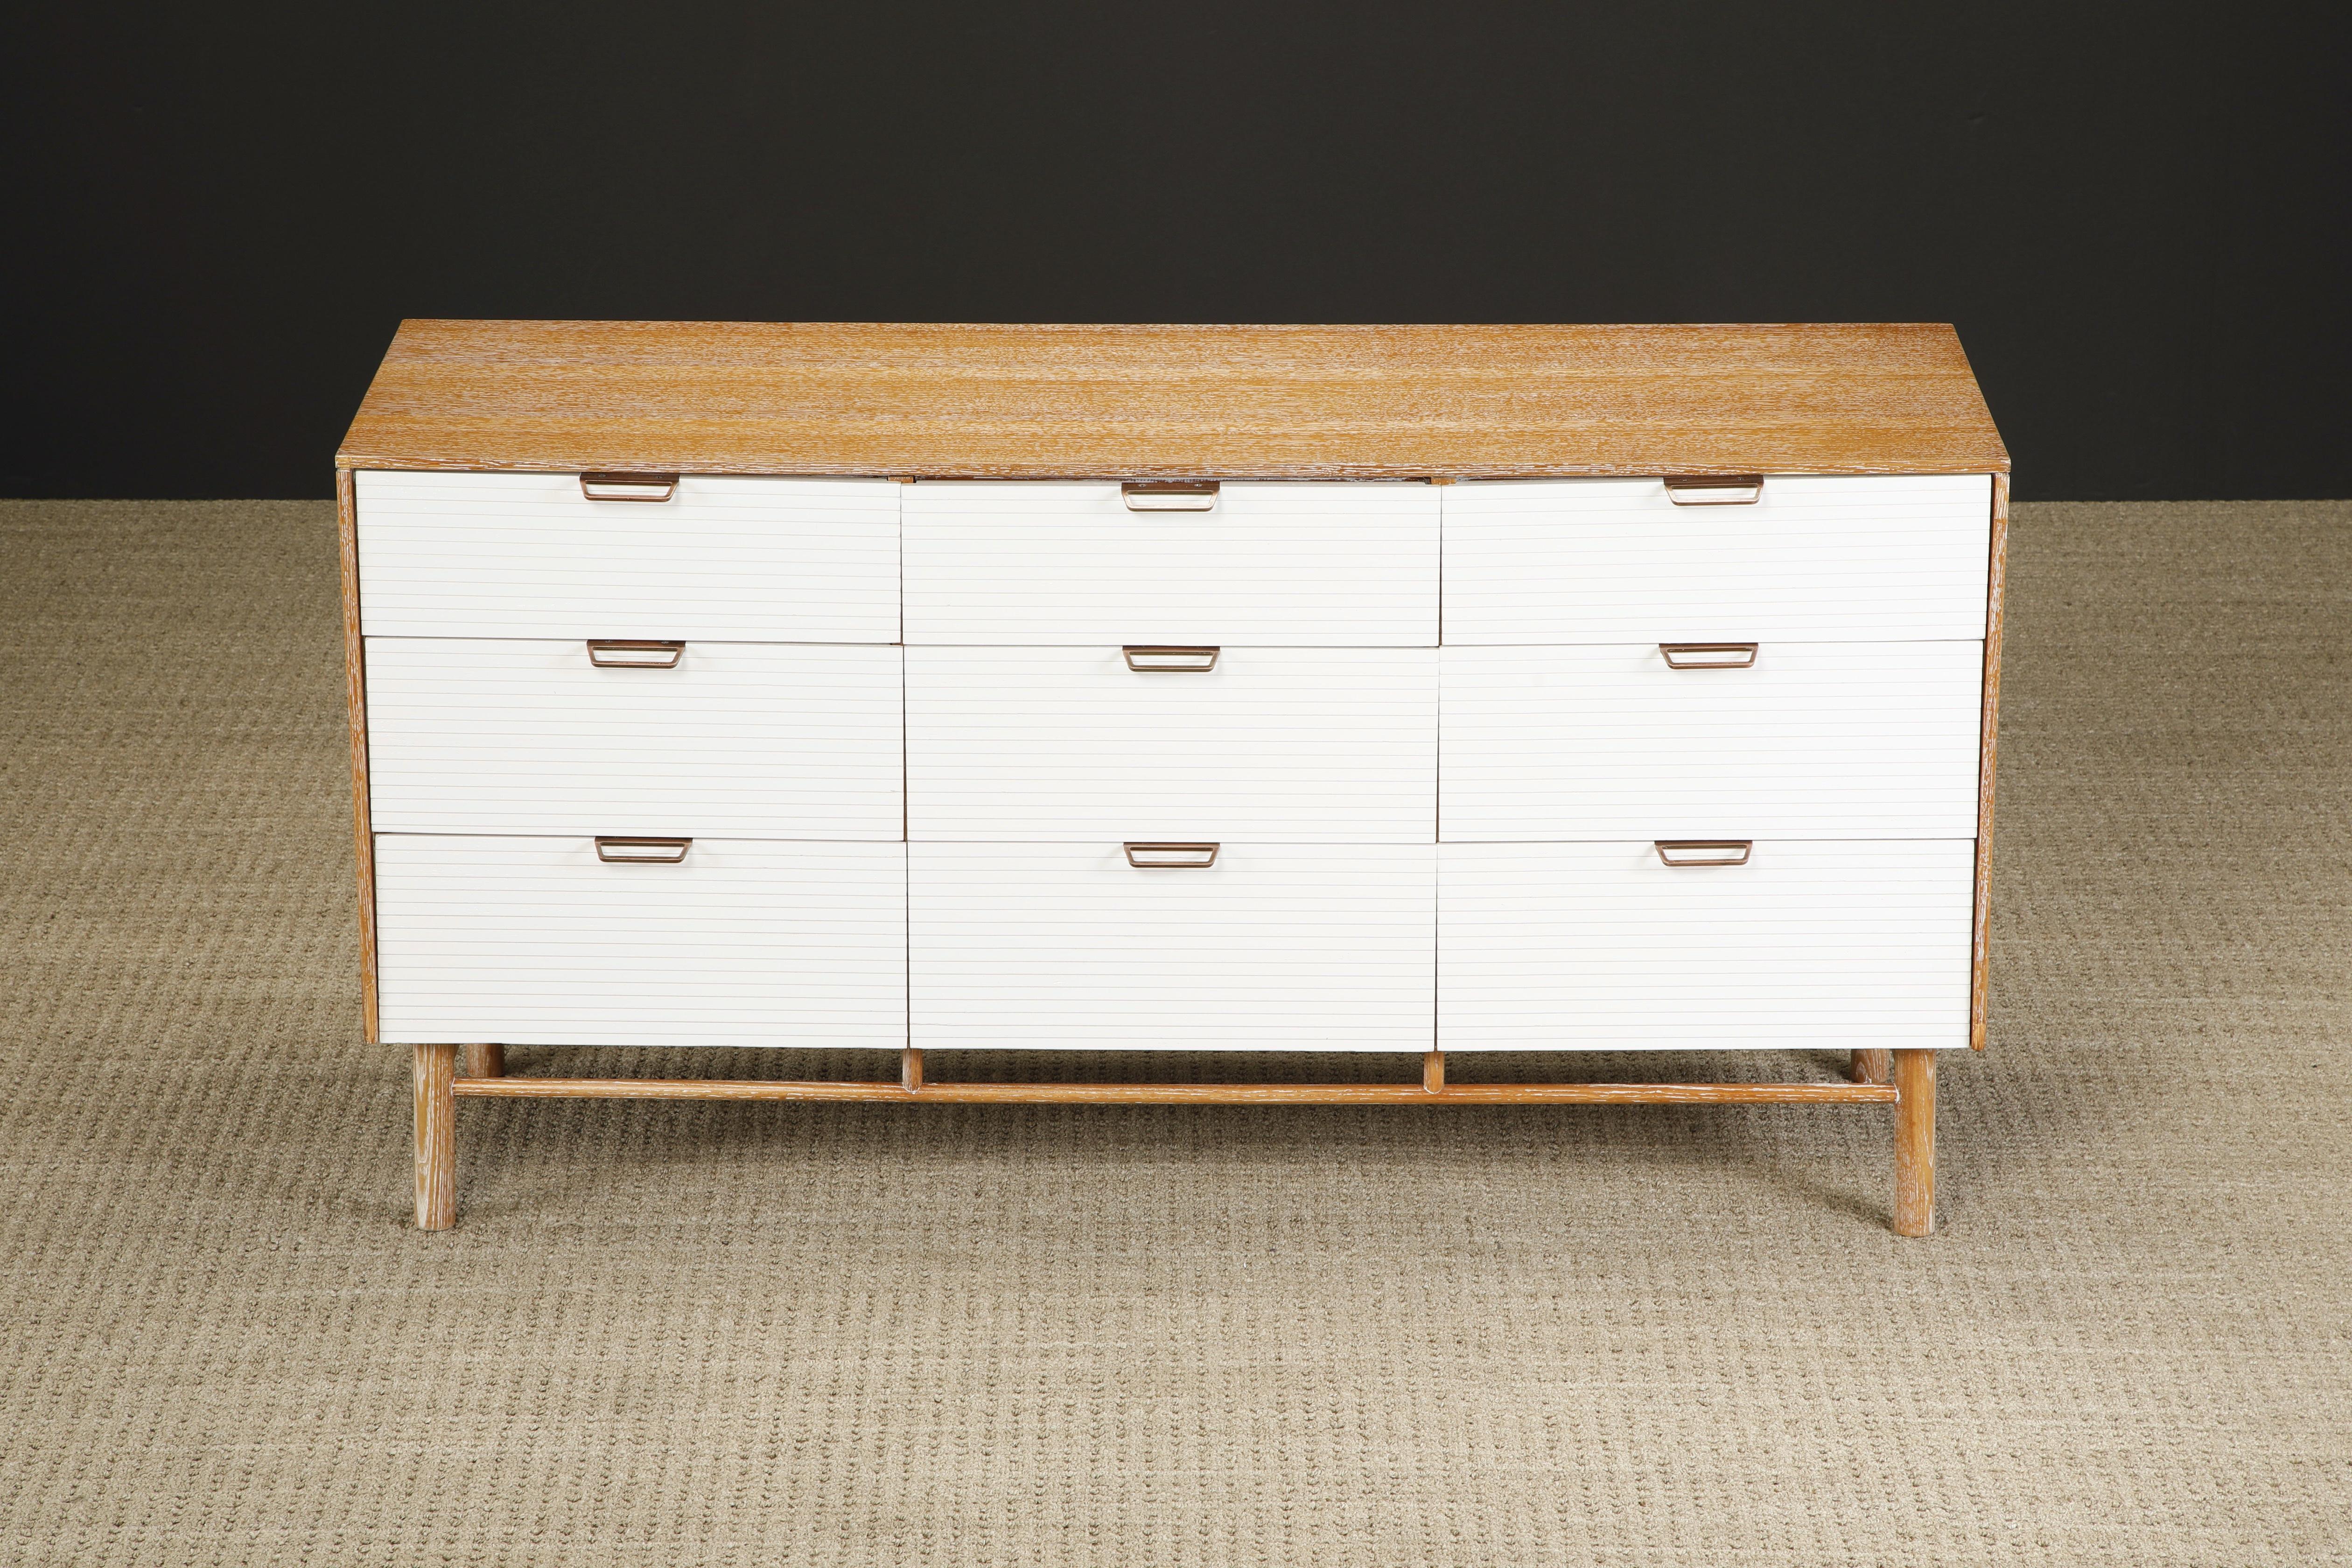 A desirable, rare and restored 9-drawer dresser by Raymond Loewy for Mengel, circa 1955, comprised of rift-sawn cerused oak with white lacquered drawer fronts and brass pulls. This Mid-Century Modern collectors piece is ready for immediate use.